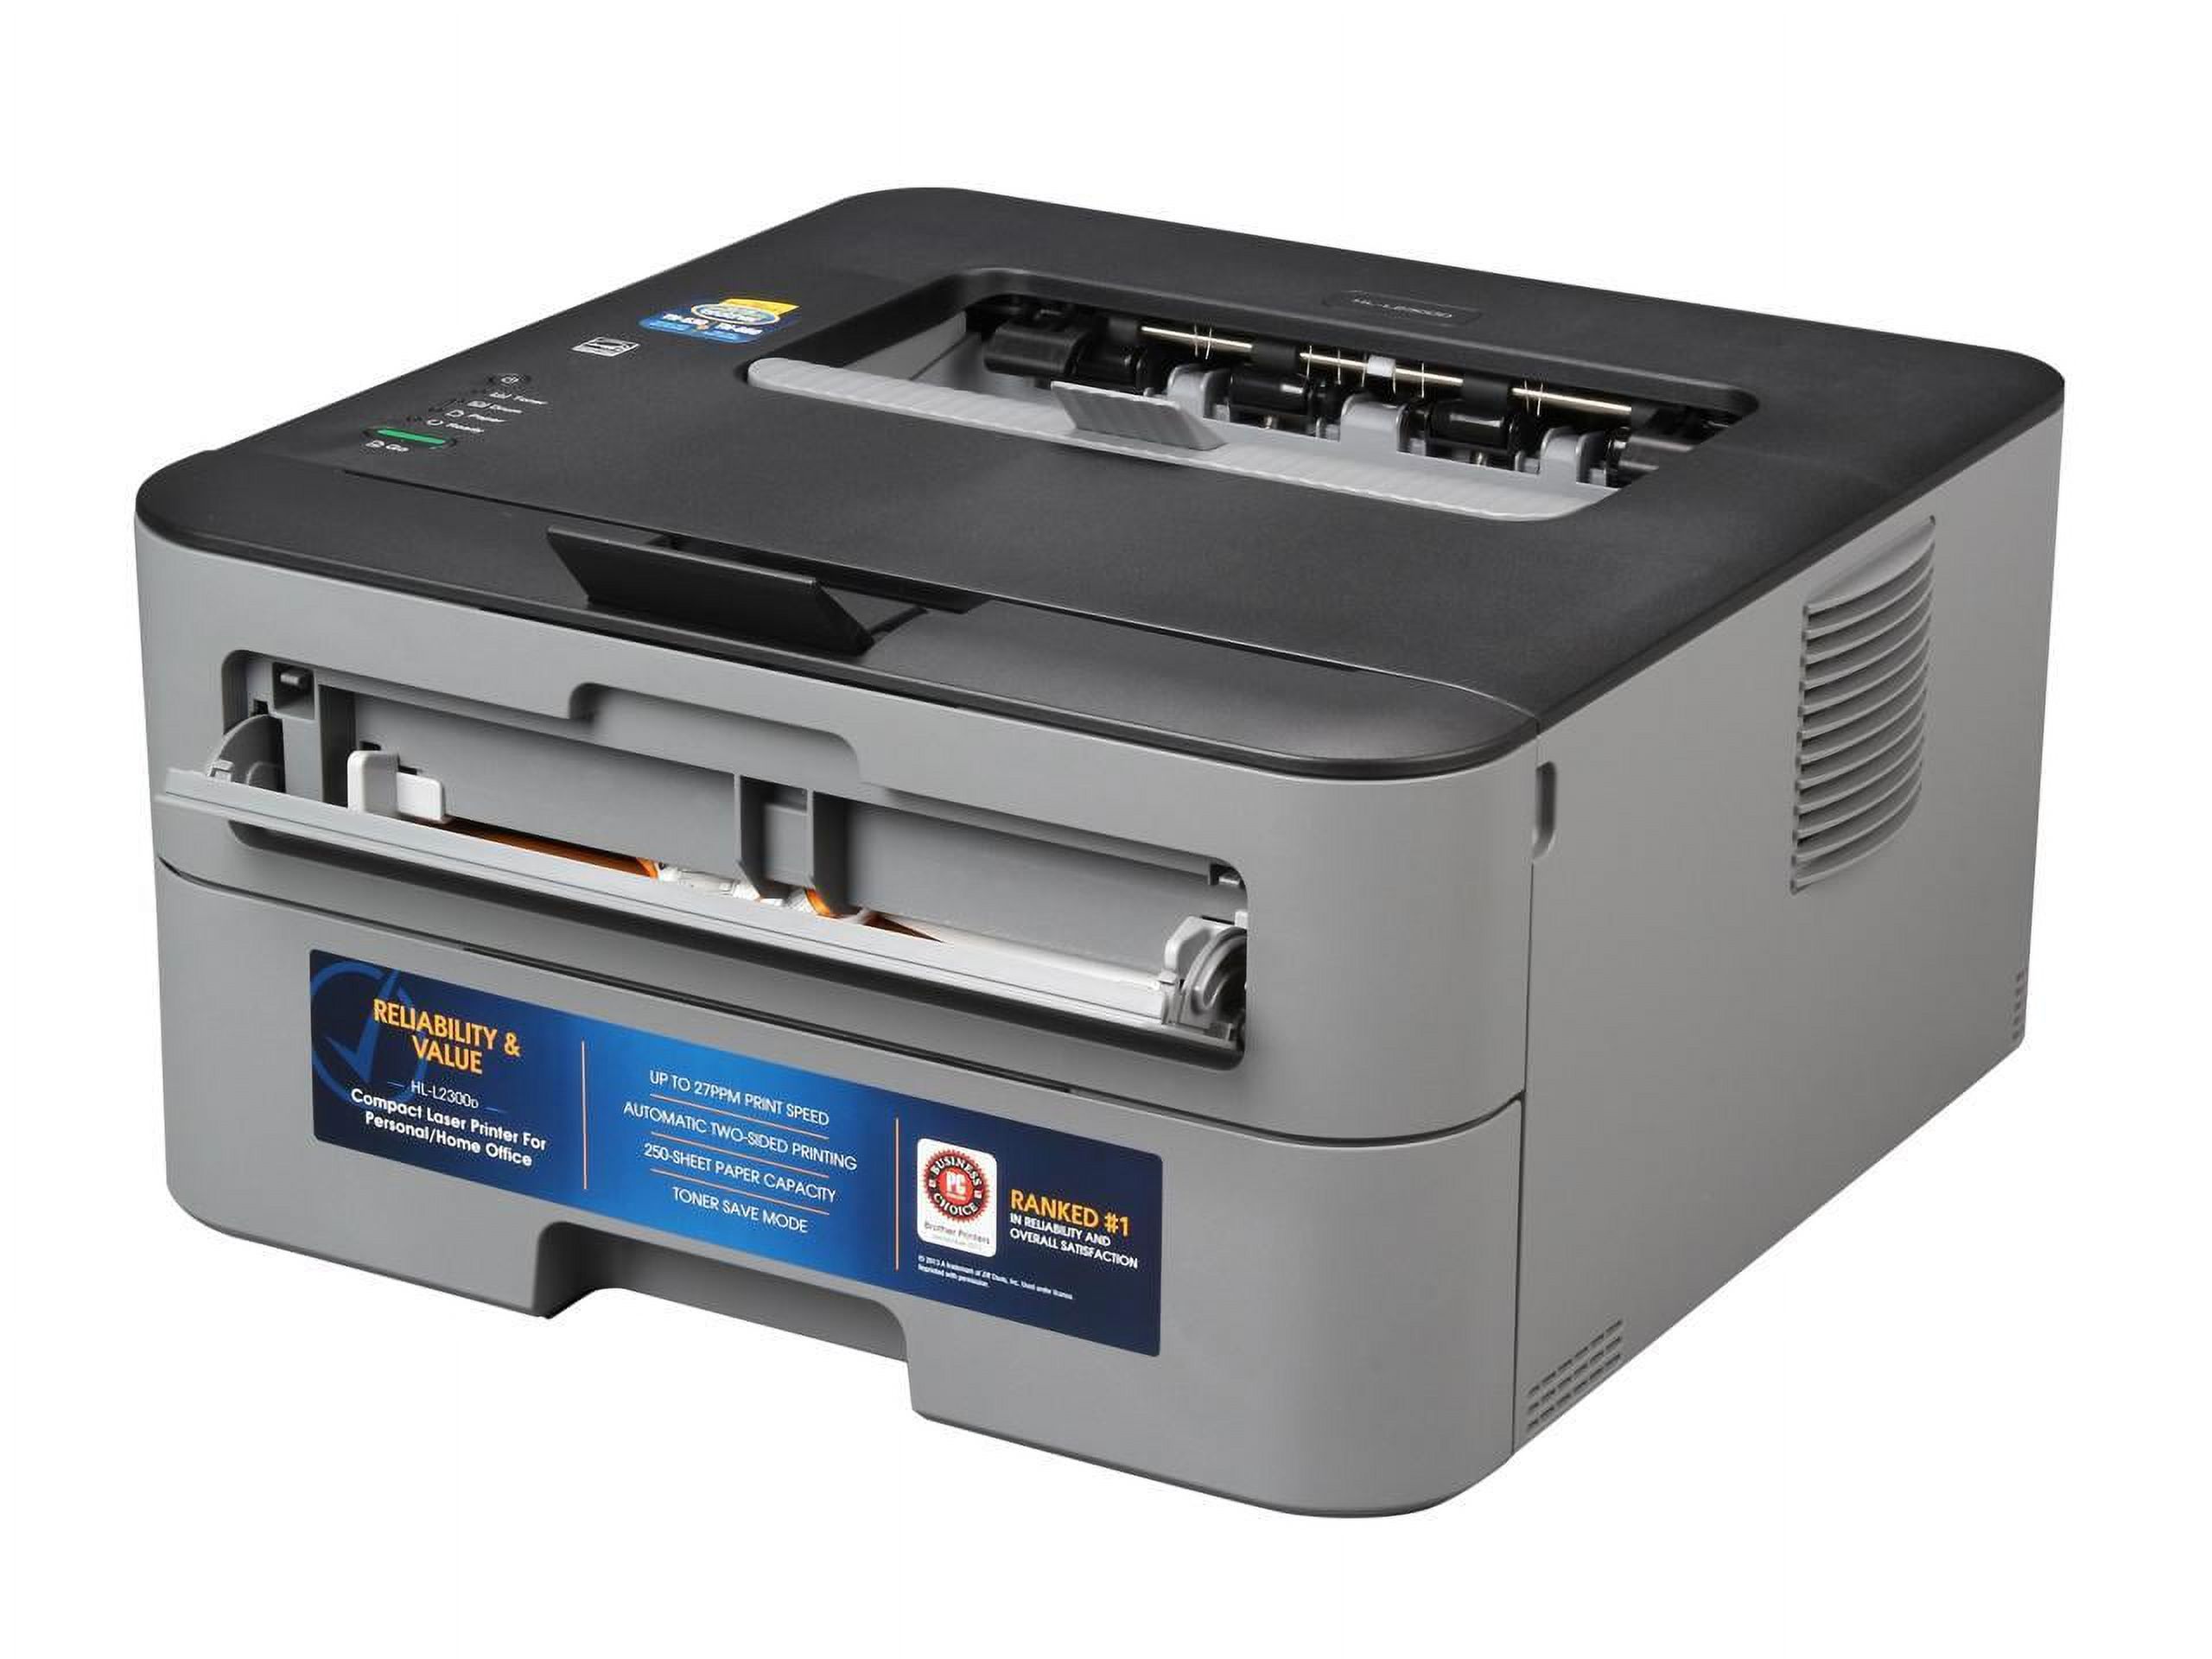 Brother HLL2300D Compact Monochrome Laser Printer, Duplex Printing - image 1 of 4